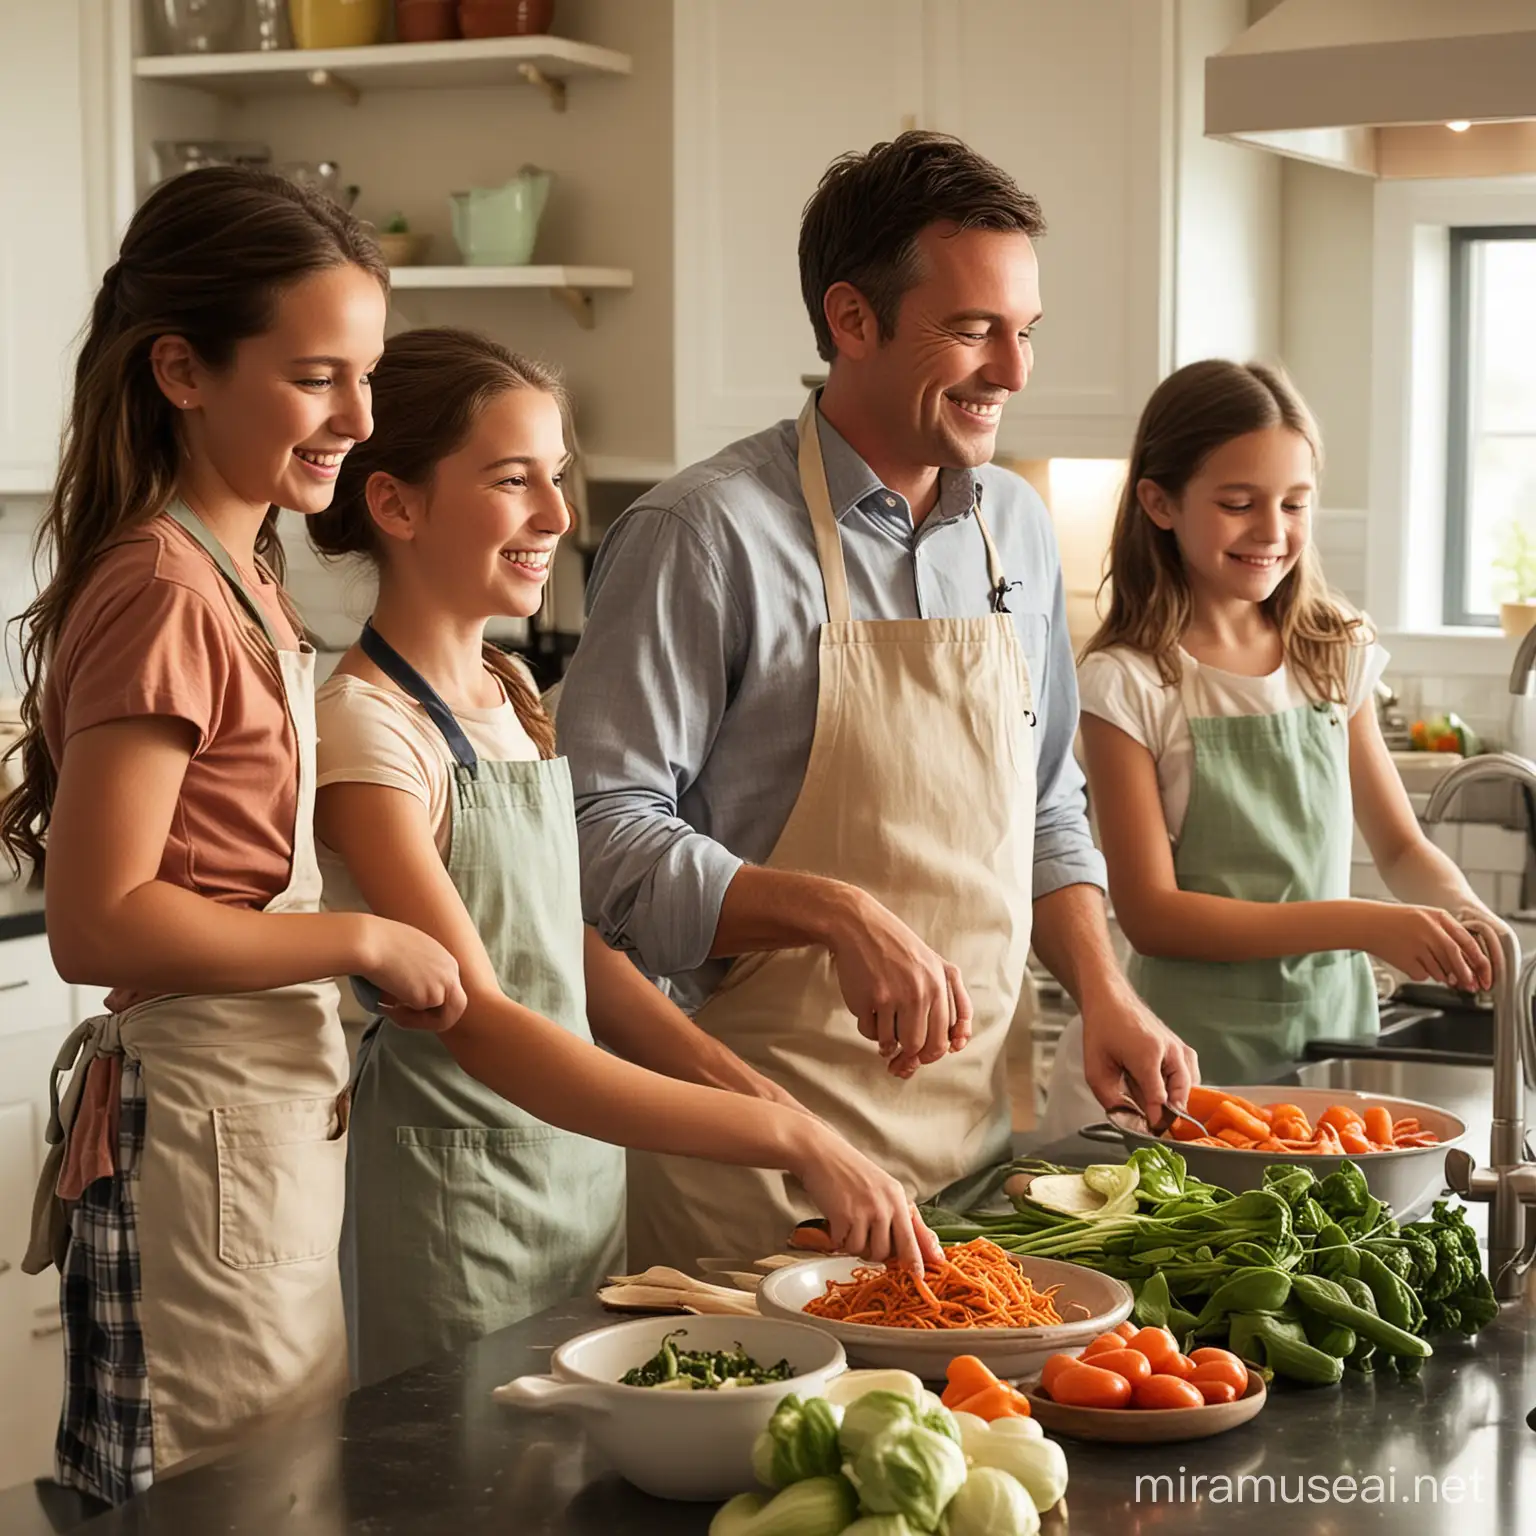 "A father and his children gather around the kitchen counter, aprons tied and smiles bright as they chop vegetables and stir pots together. The warm glow of the kitchen lights illuminates their faces, capturing a moment of joy and togetherness in the midst of meal preparation."